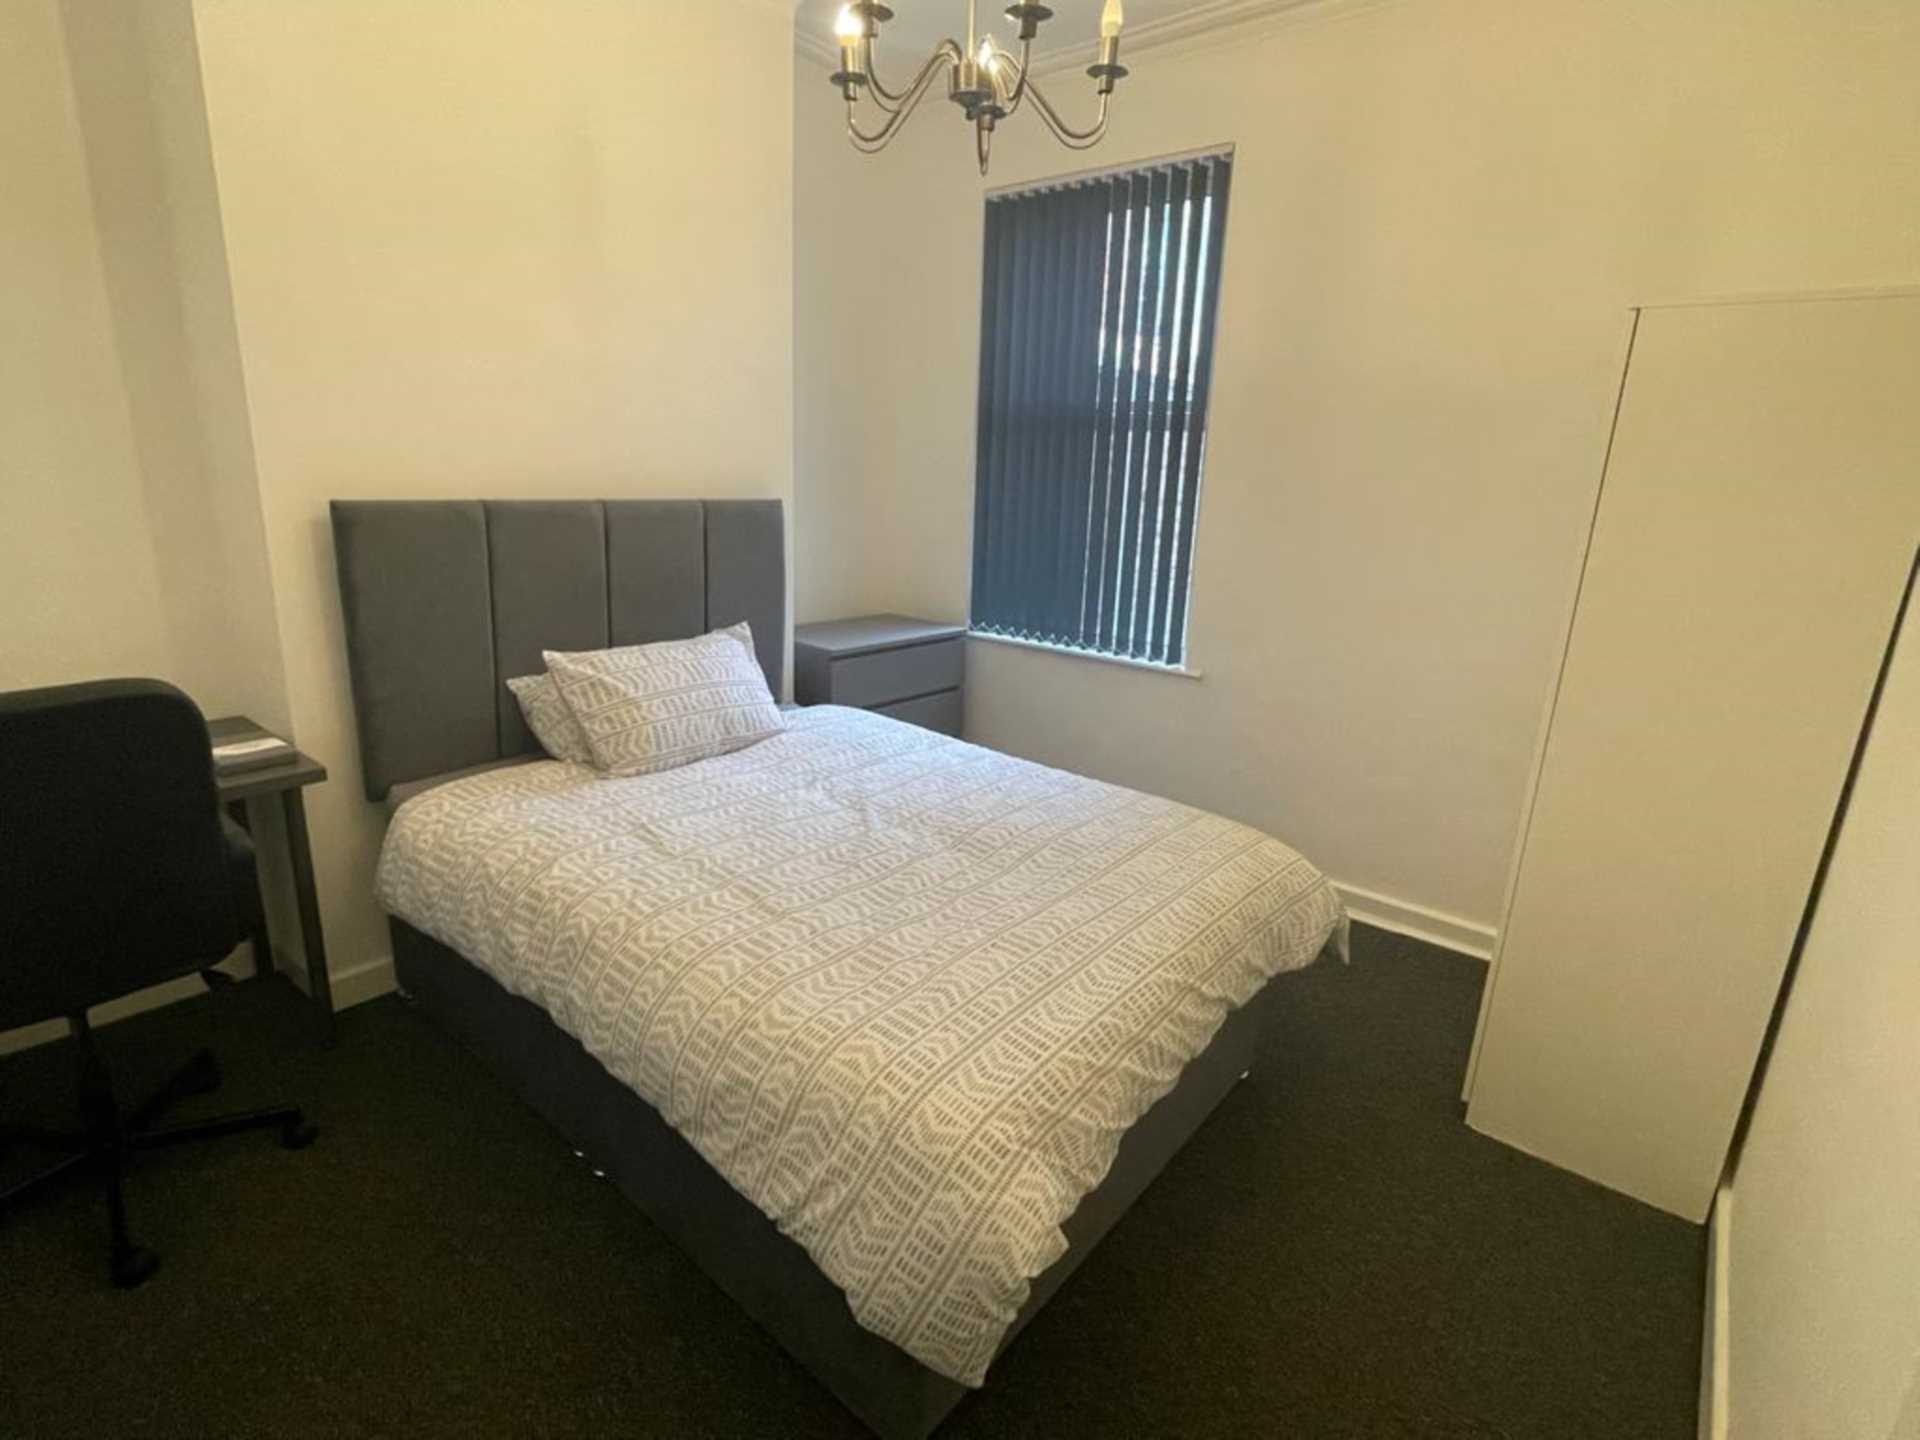 Thornycroft Road, Wavertree - STUDENTS/PROFESSIONALS - 2 Rooms Available, Image 8